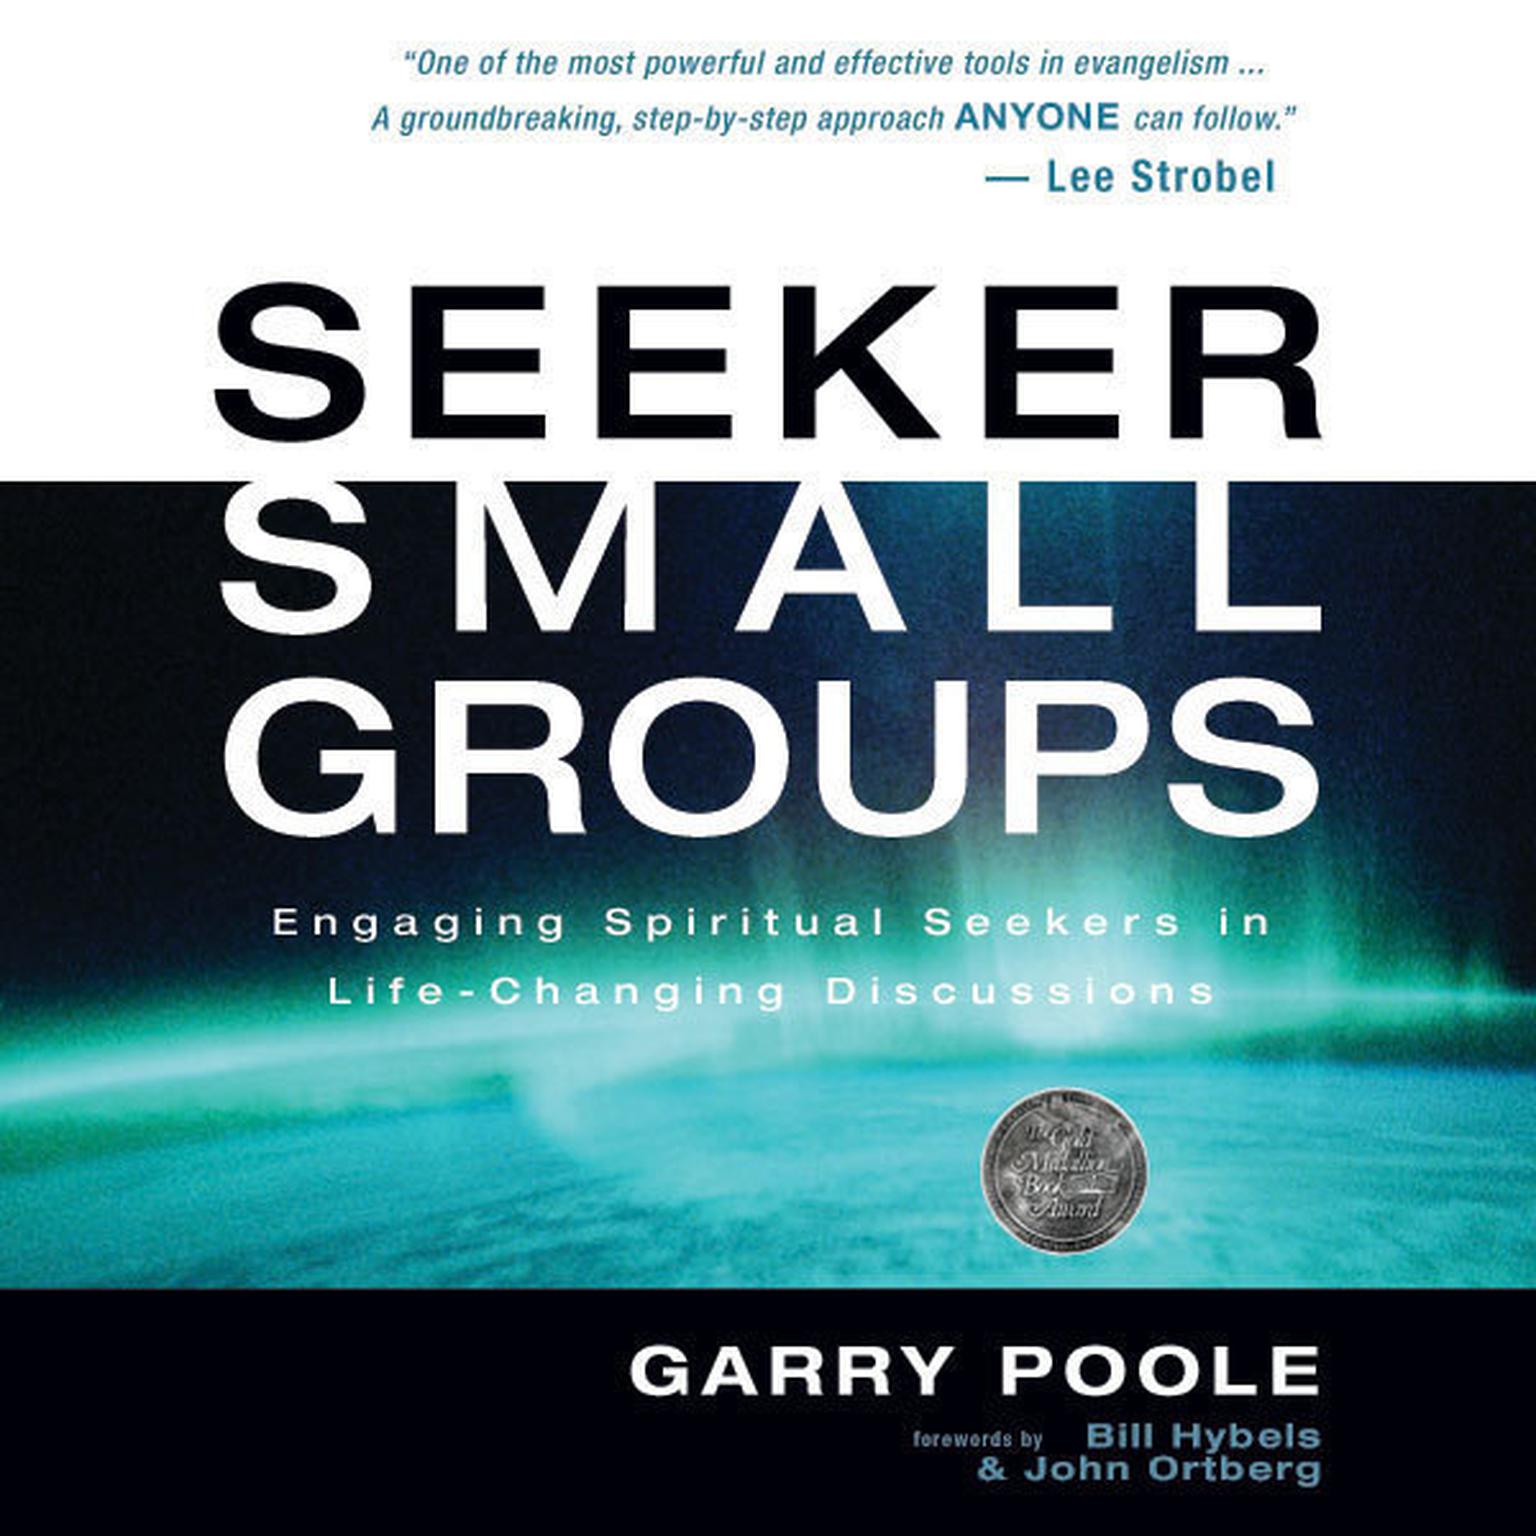 Seeker Small Groups: Engaging Spiritual Seekers in Life-Changing Discussions Audiobook, by Garry Poole